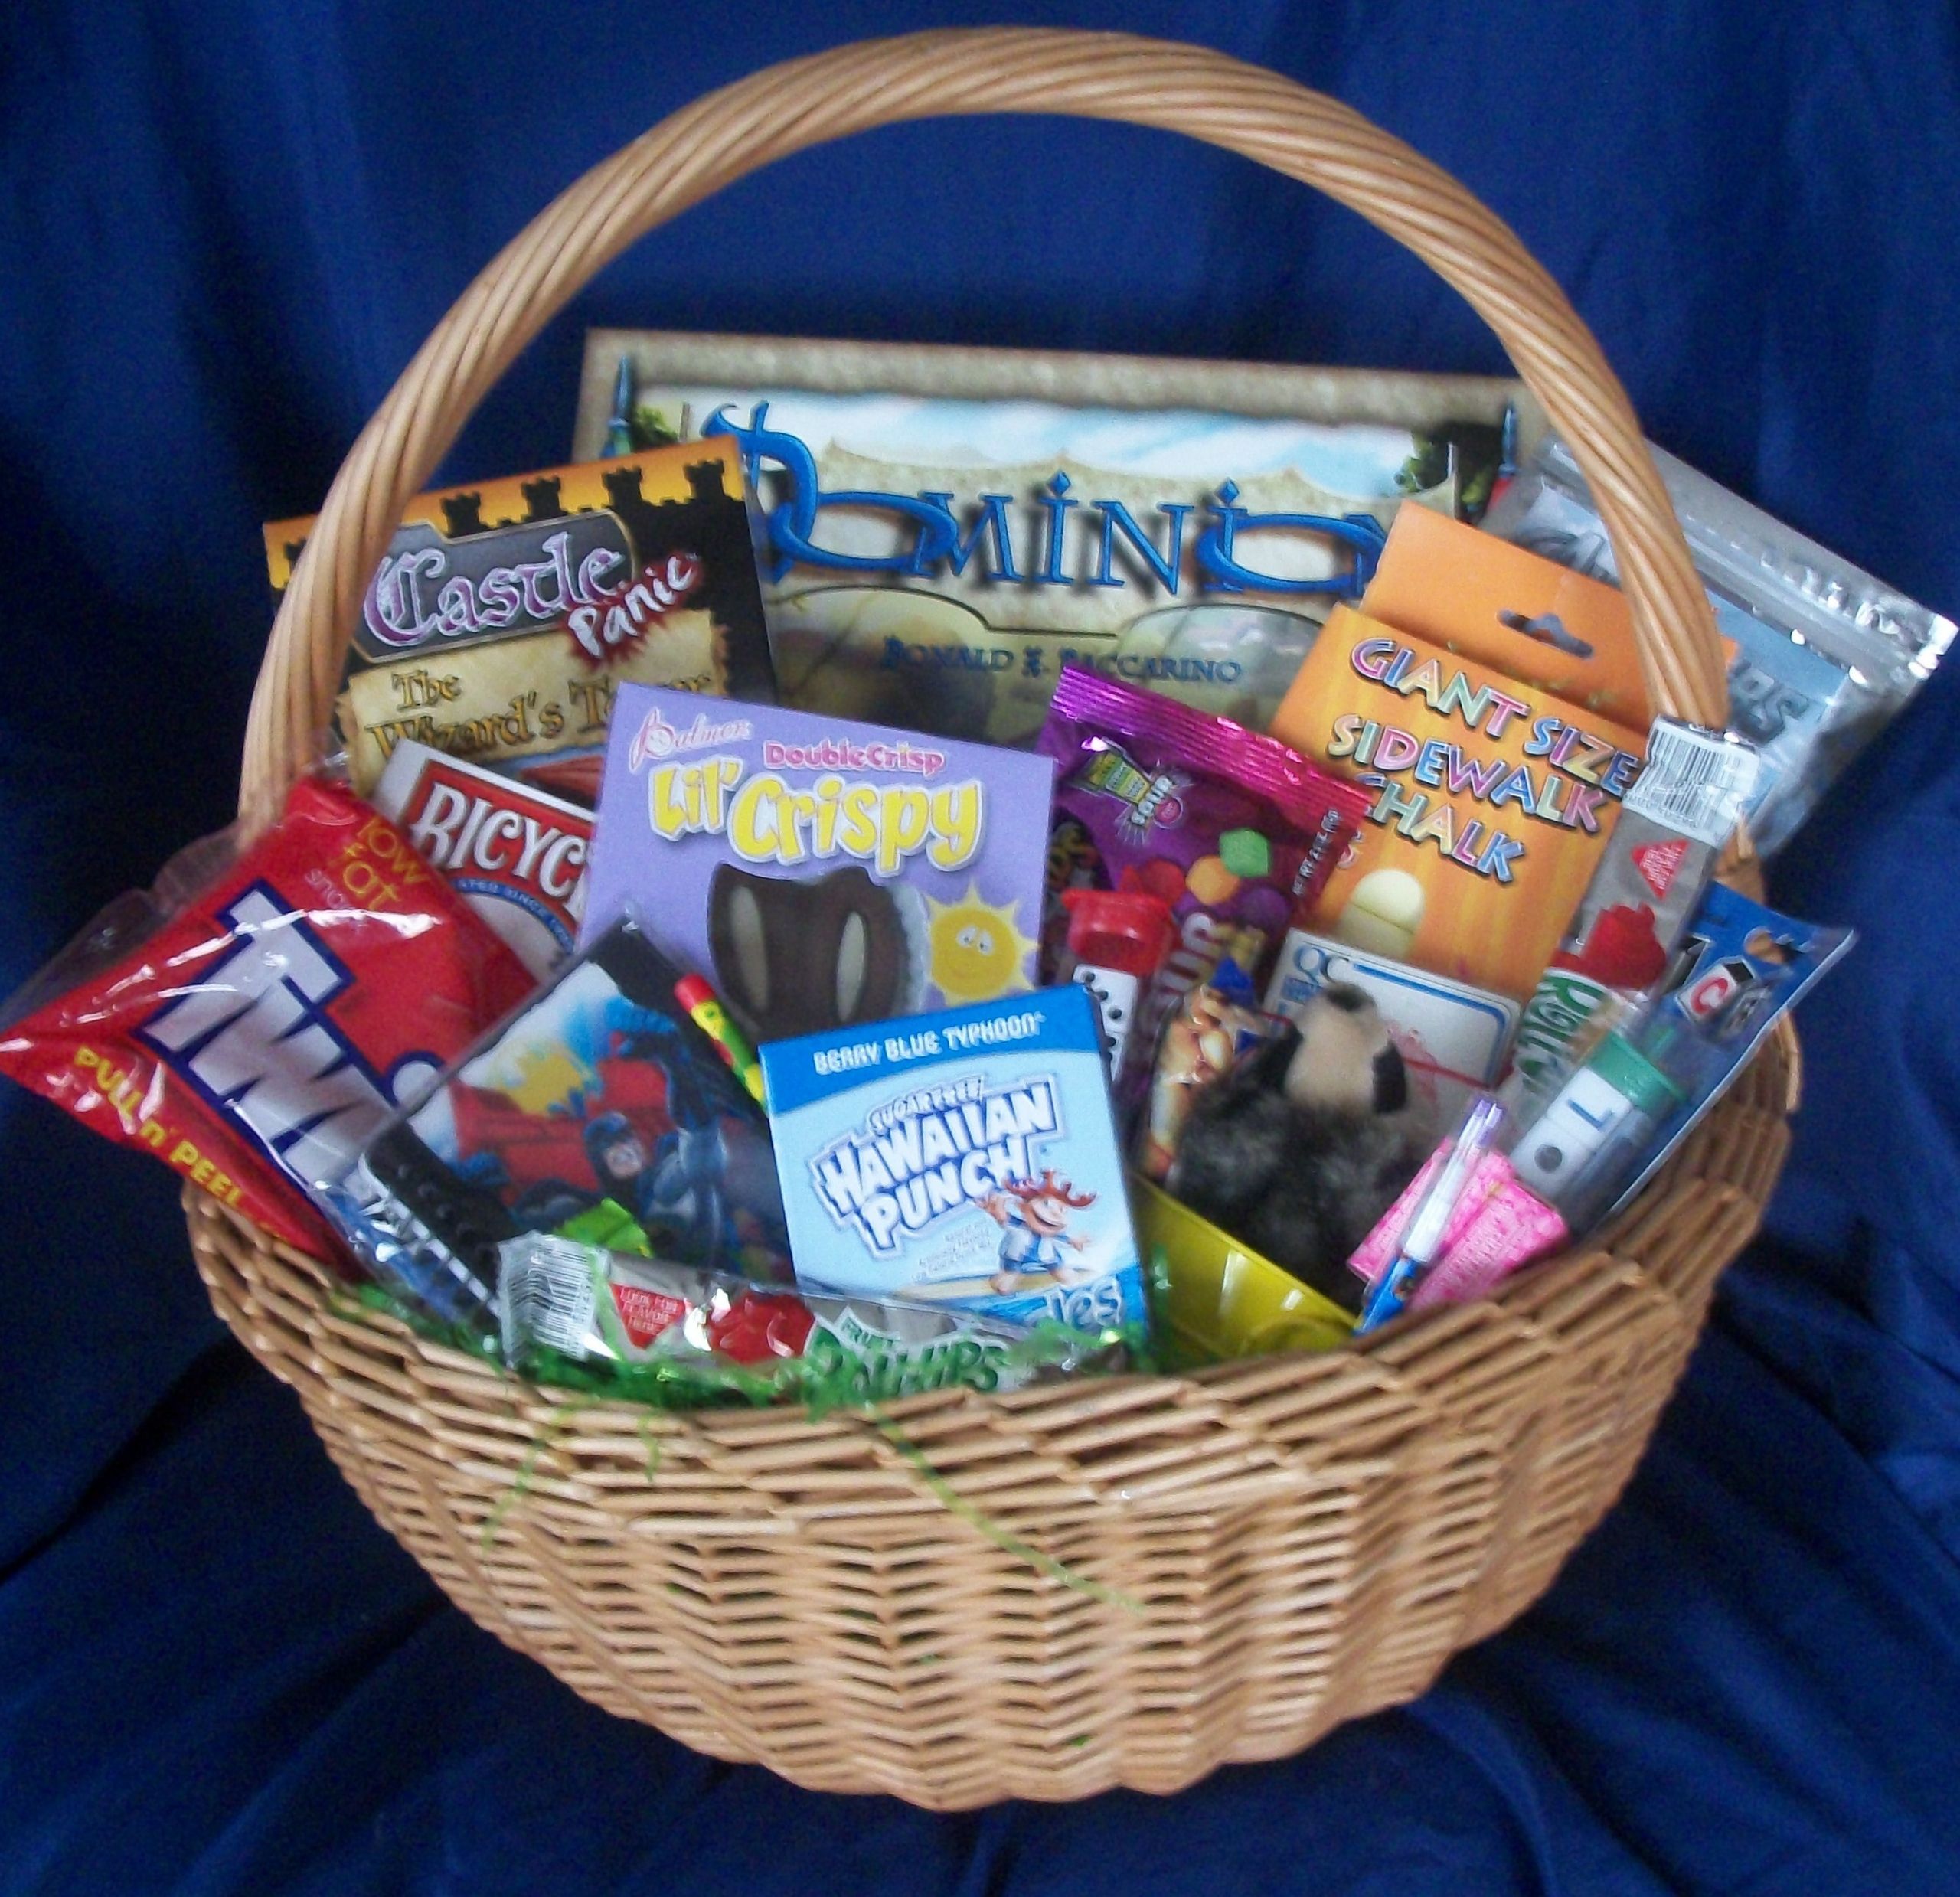 Family Fun Gift Basket Ideas
 Game Gift Baskets – All About Fun and Games